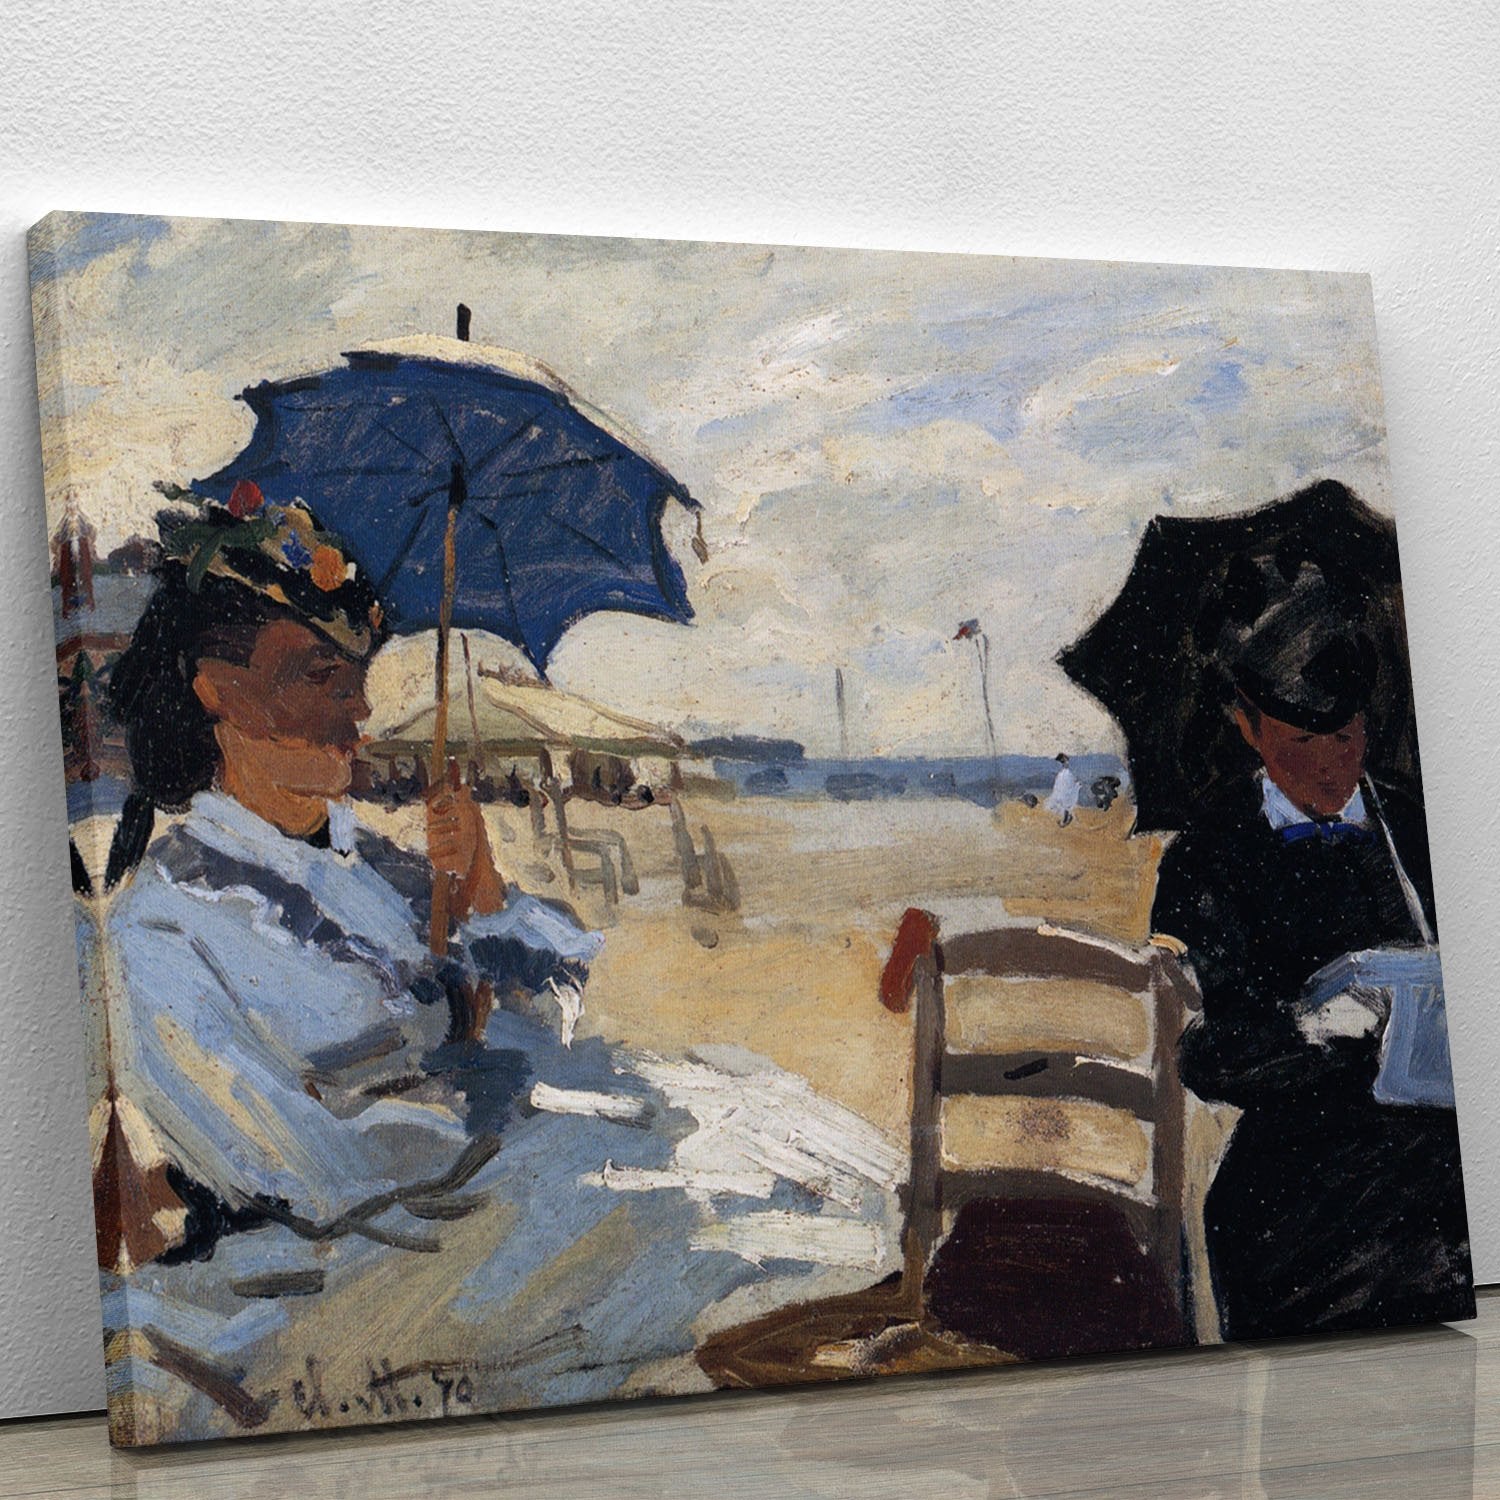 The beach a Trouville by Monet Canvas Print or Poster